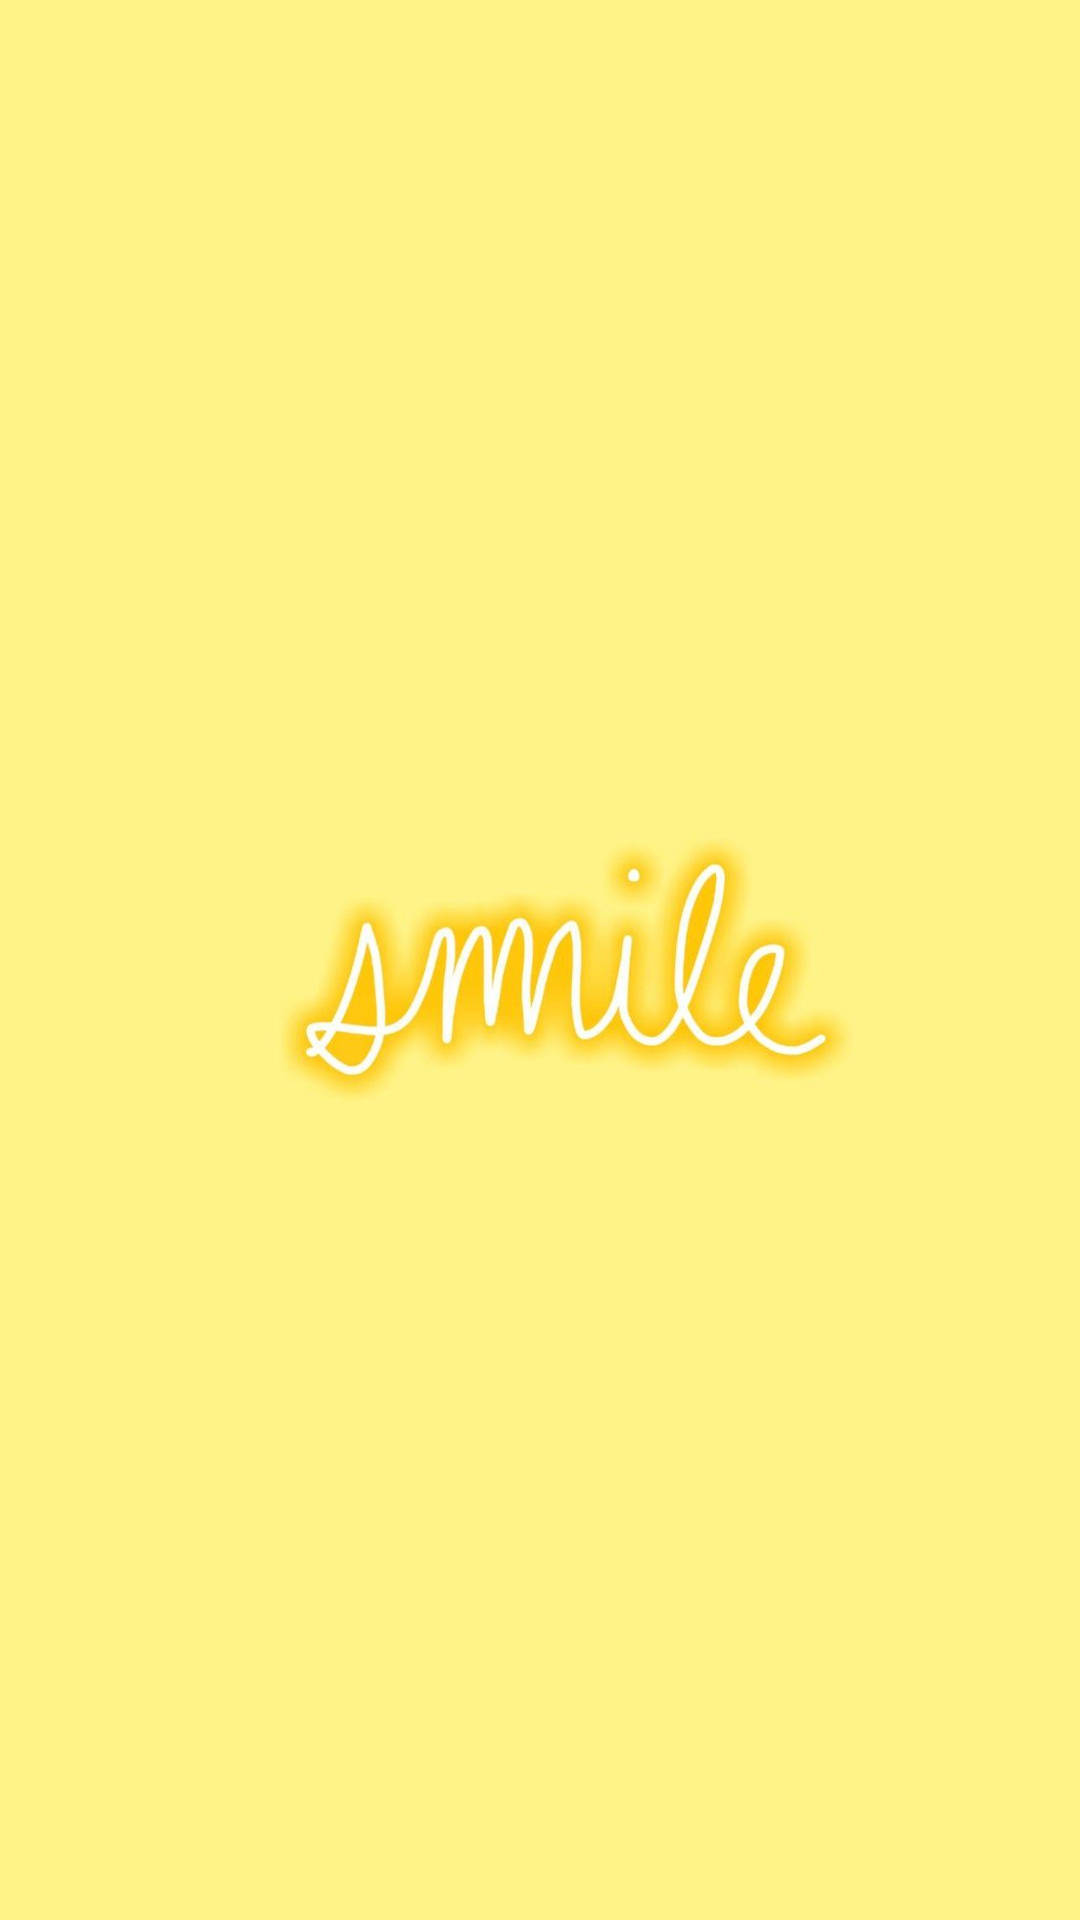 Explore Your Life’s Sunny Side And Find Joy In Something As Simple As A Yellow Aesthetic. Background